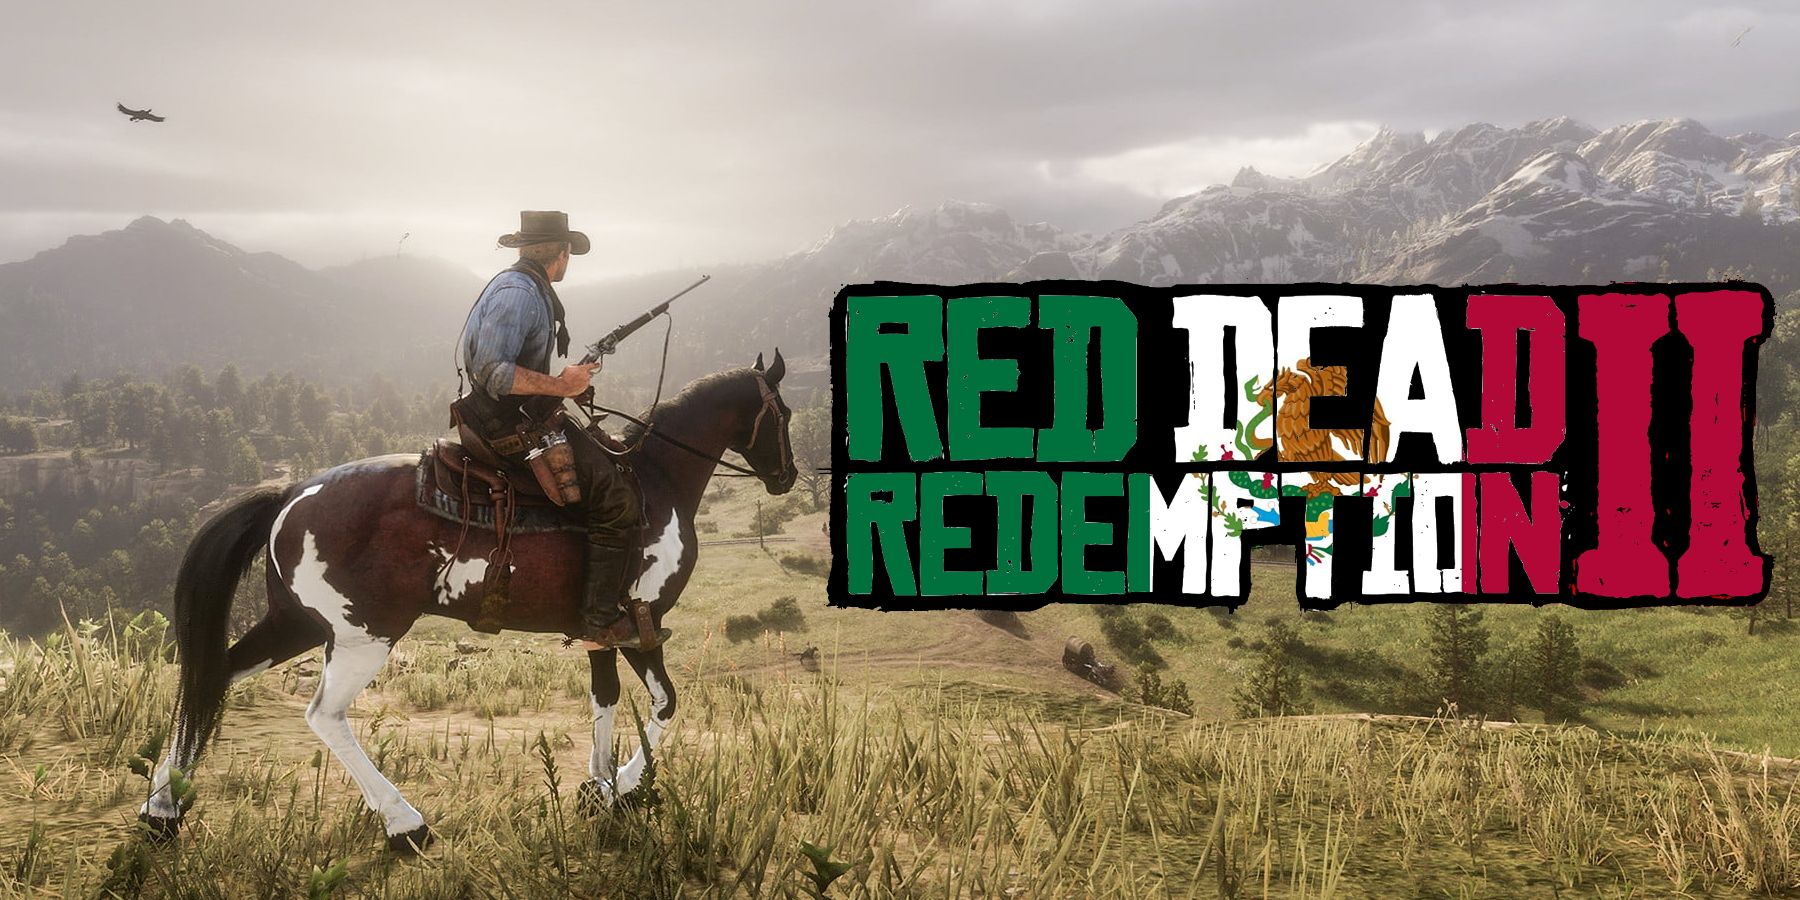 Red Dead Redemption 2 Mod Tons Mexico Locations ekliyor